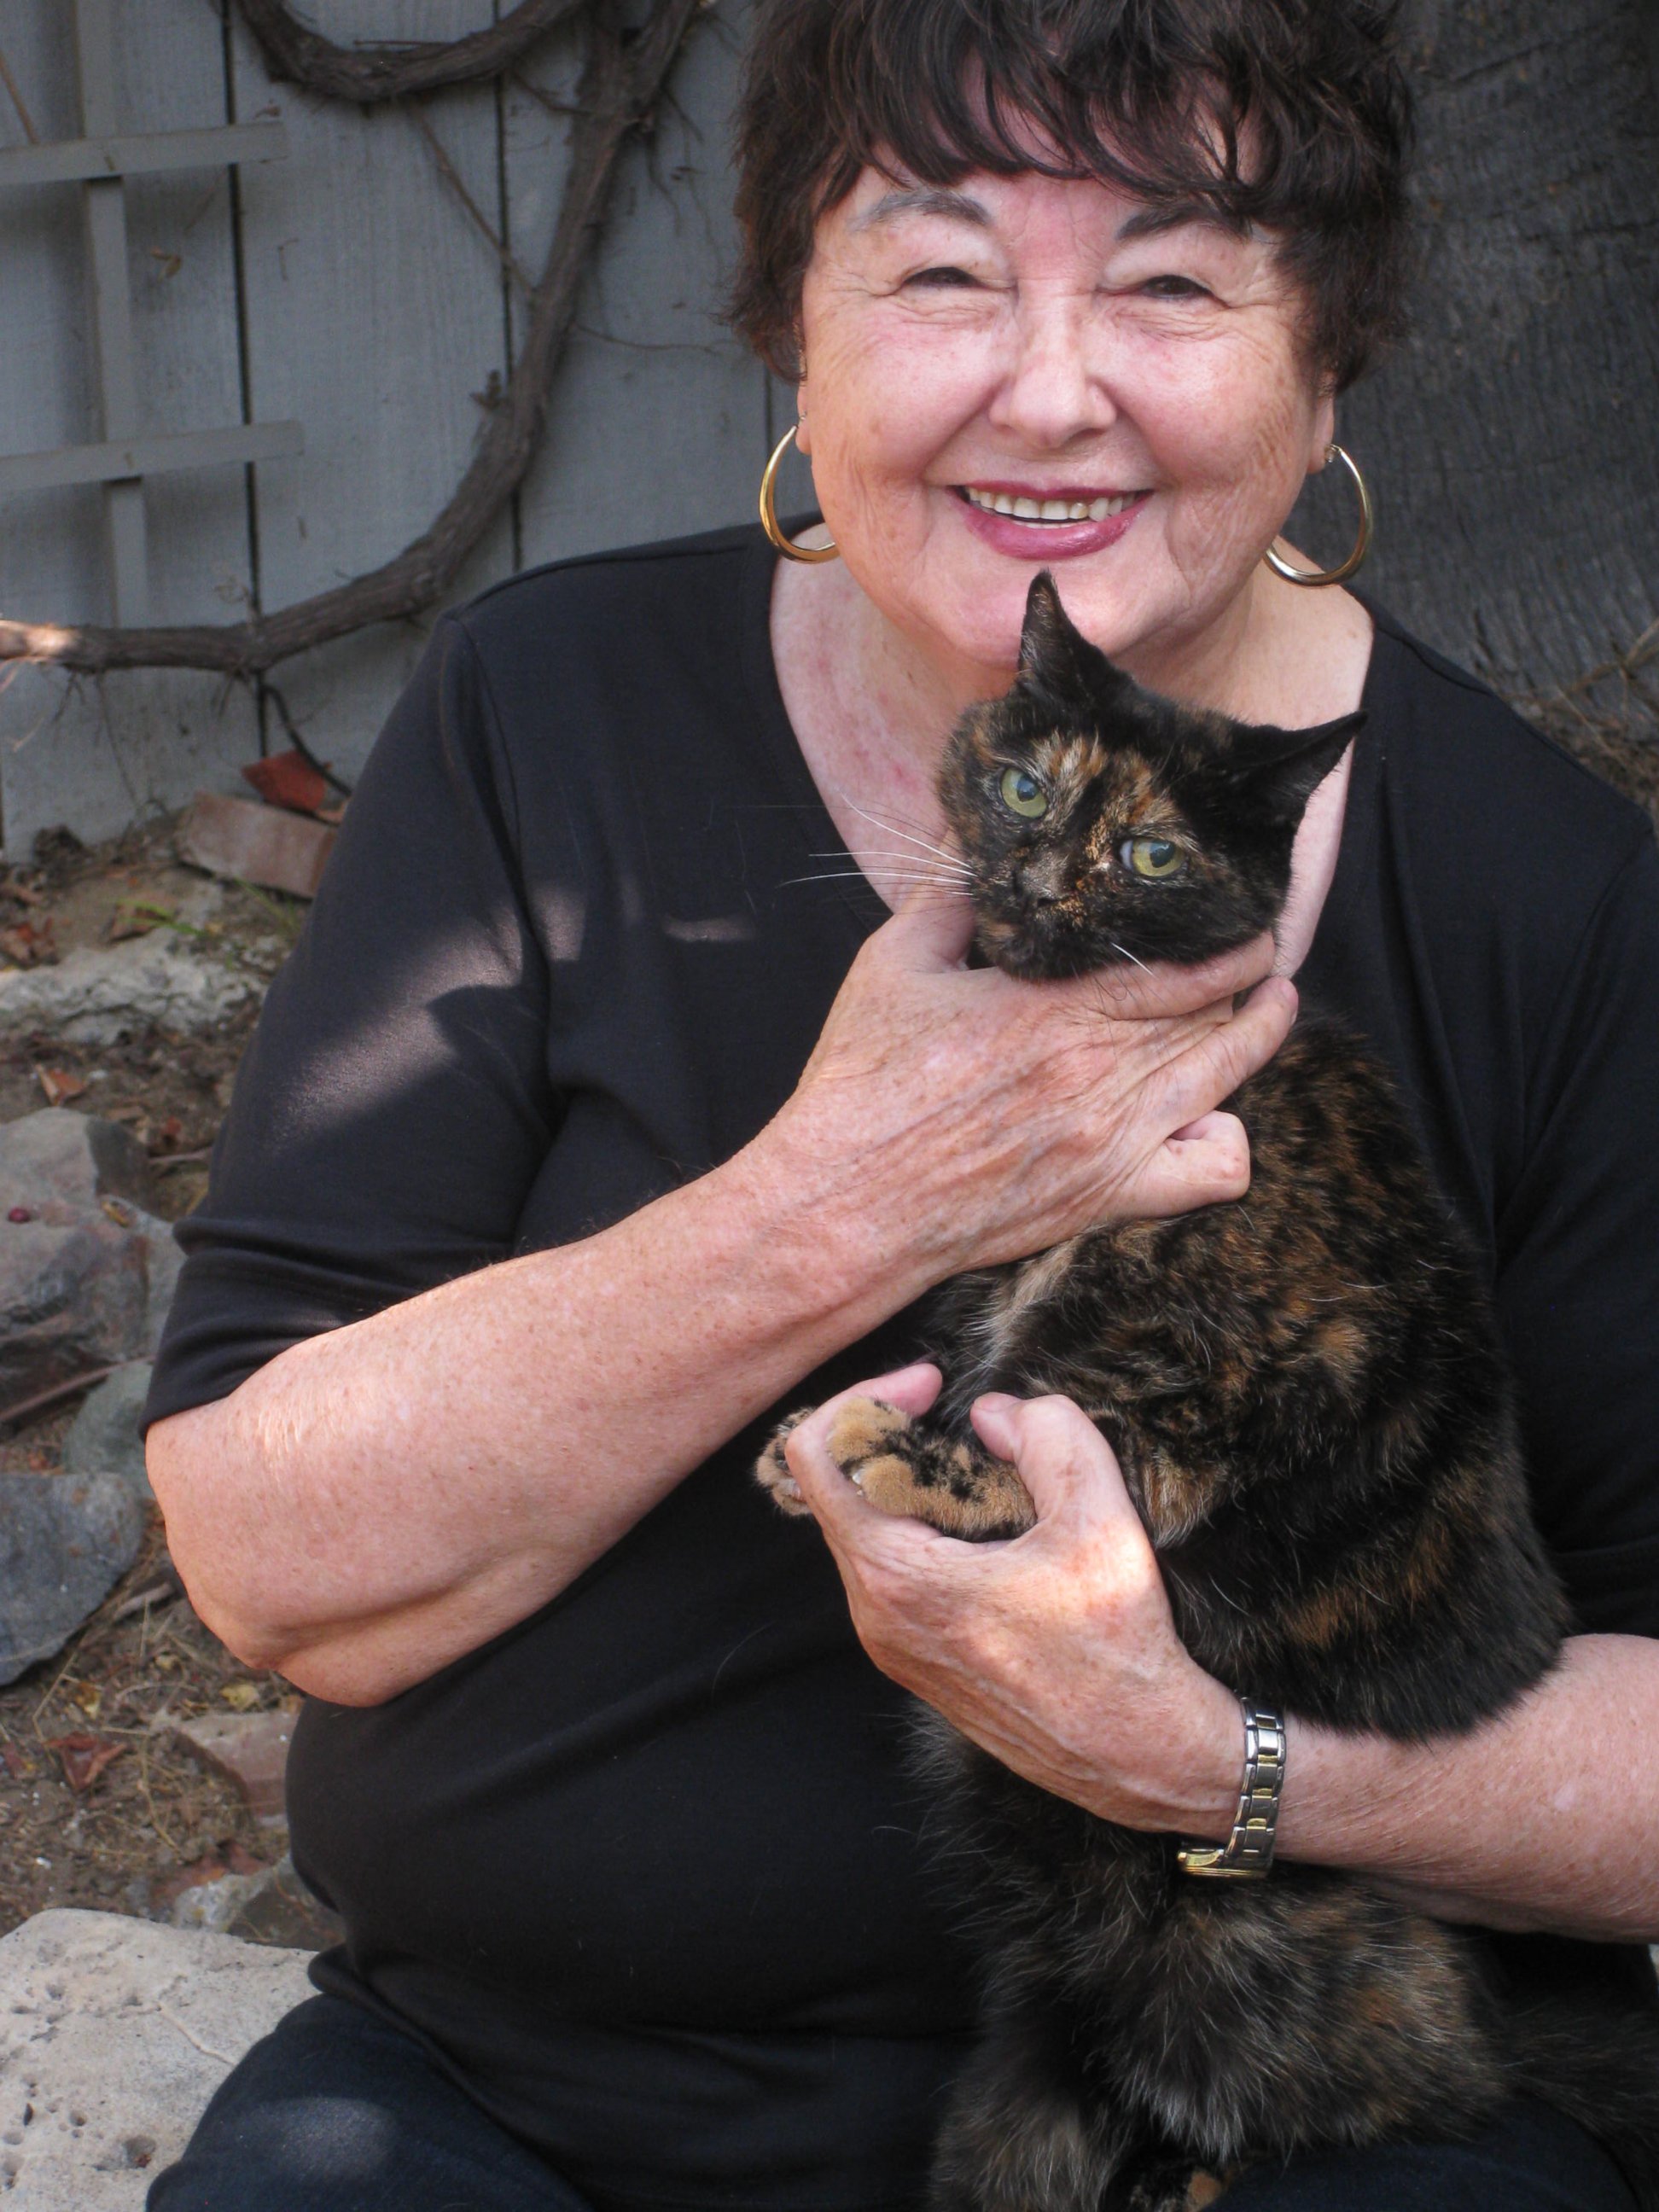 PHOTO: Tiffany Two, recognized by Guinness as the world's oldest living cat at 27 years old, is held by her owner, Sharon Voorhees, in an undated handout photo.